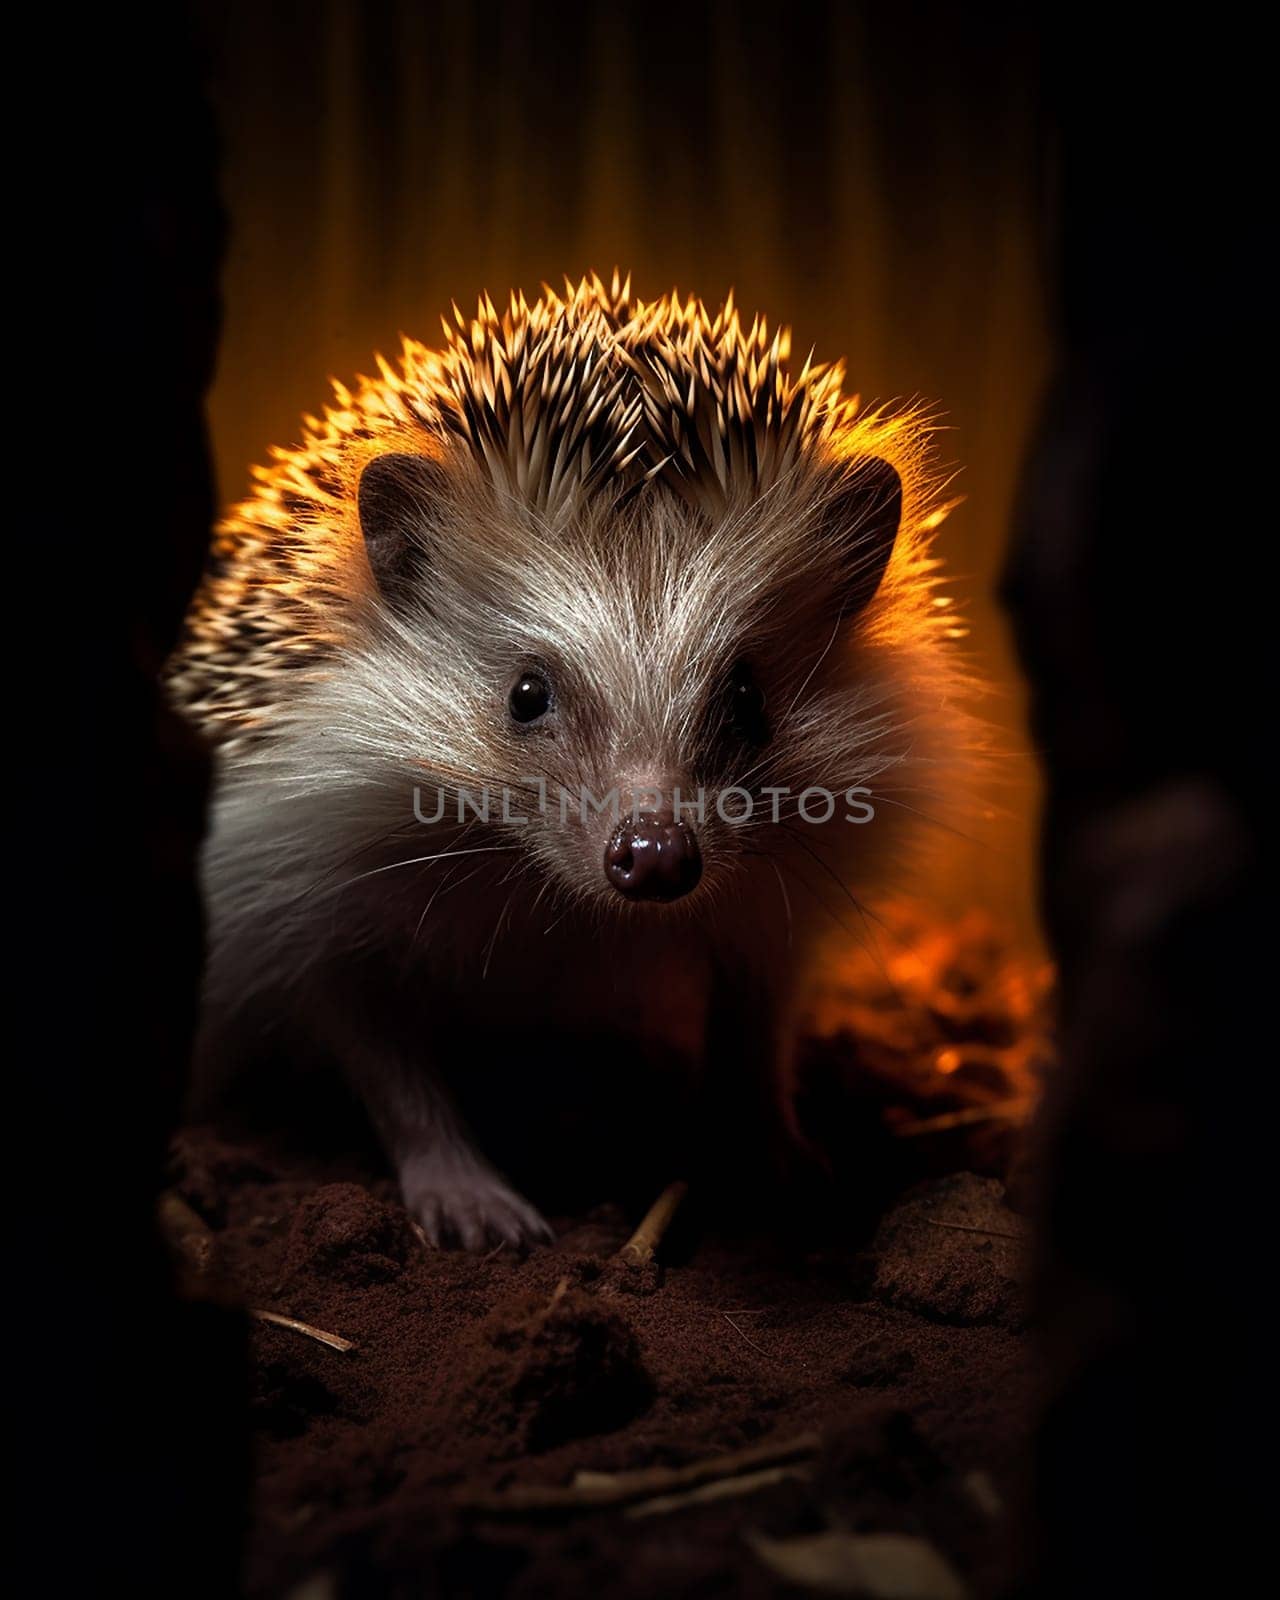 Curious hedgehog peering out, warmly backlit with an intense gaze.